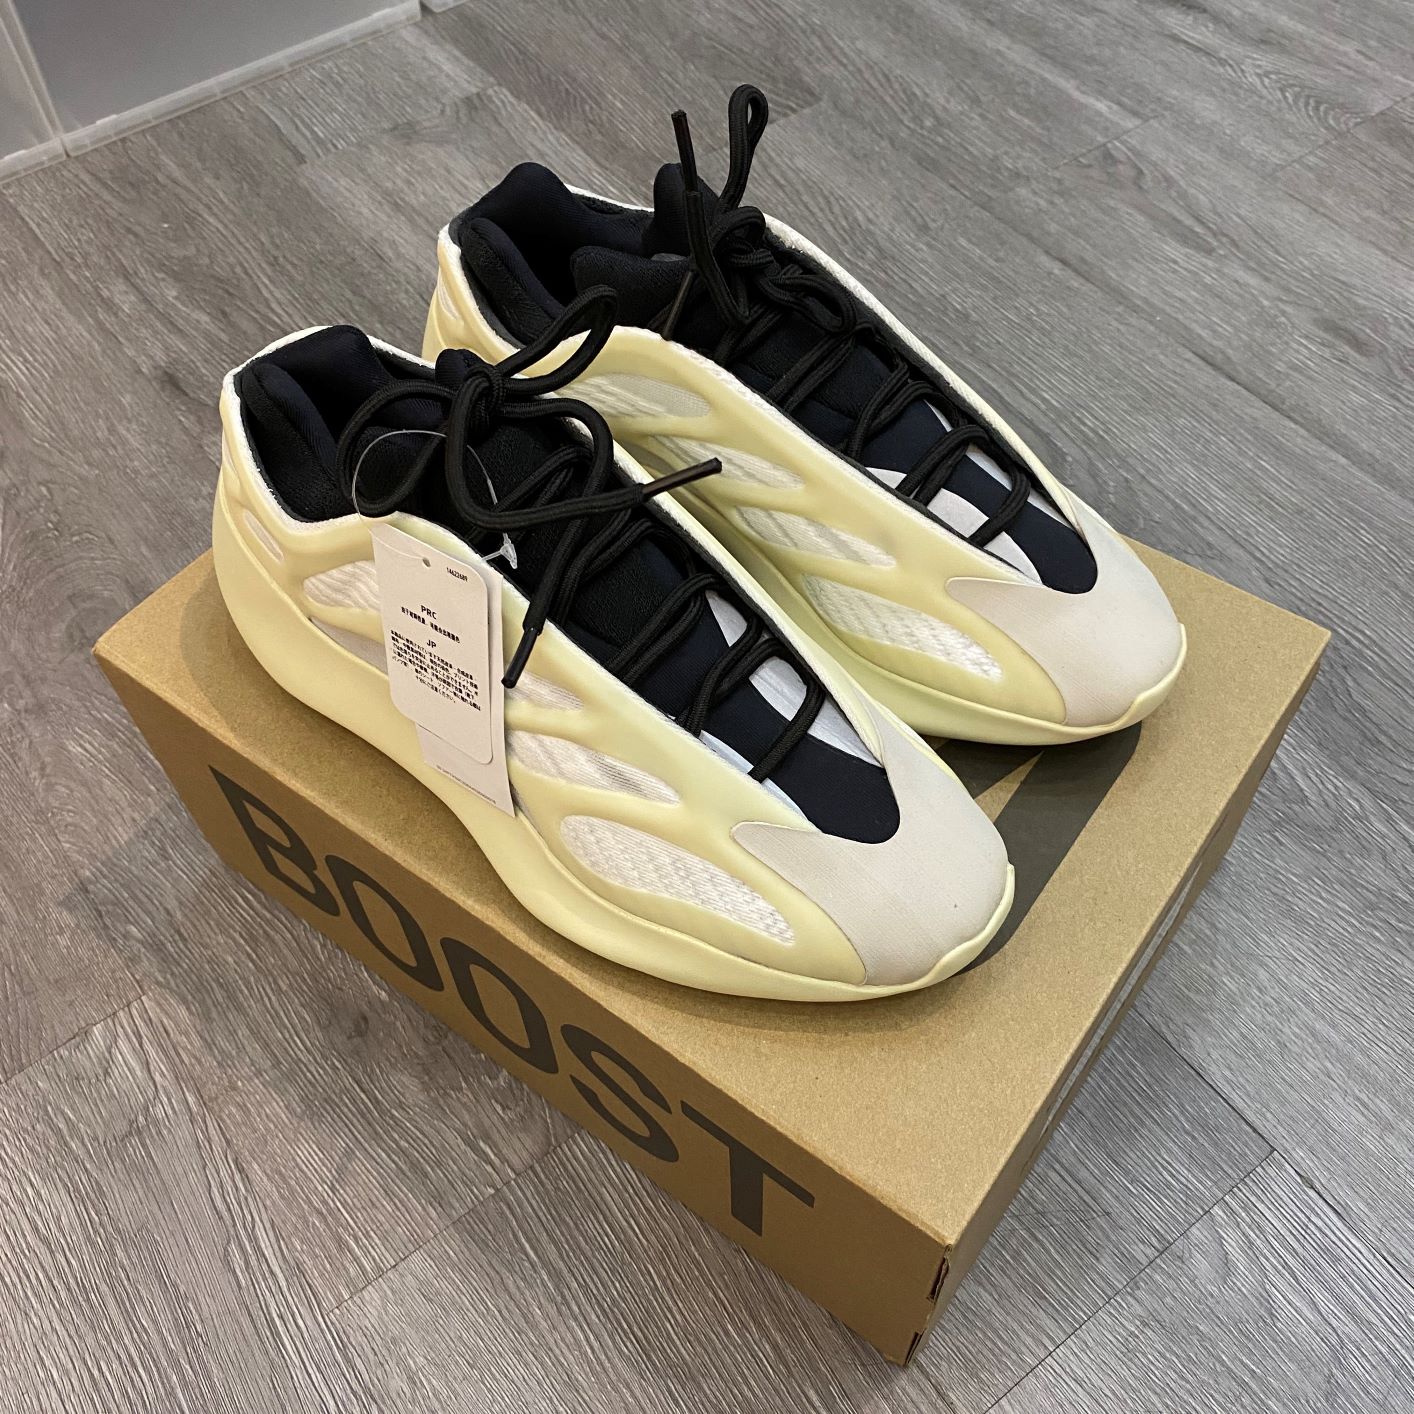 First Look at a New Adidas Yeezy 700 Boost Colorway | Complex